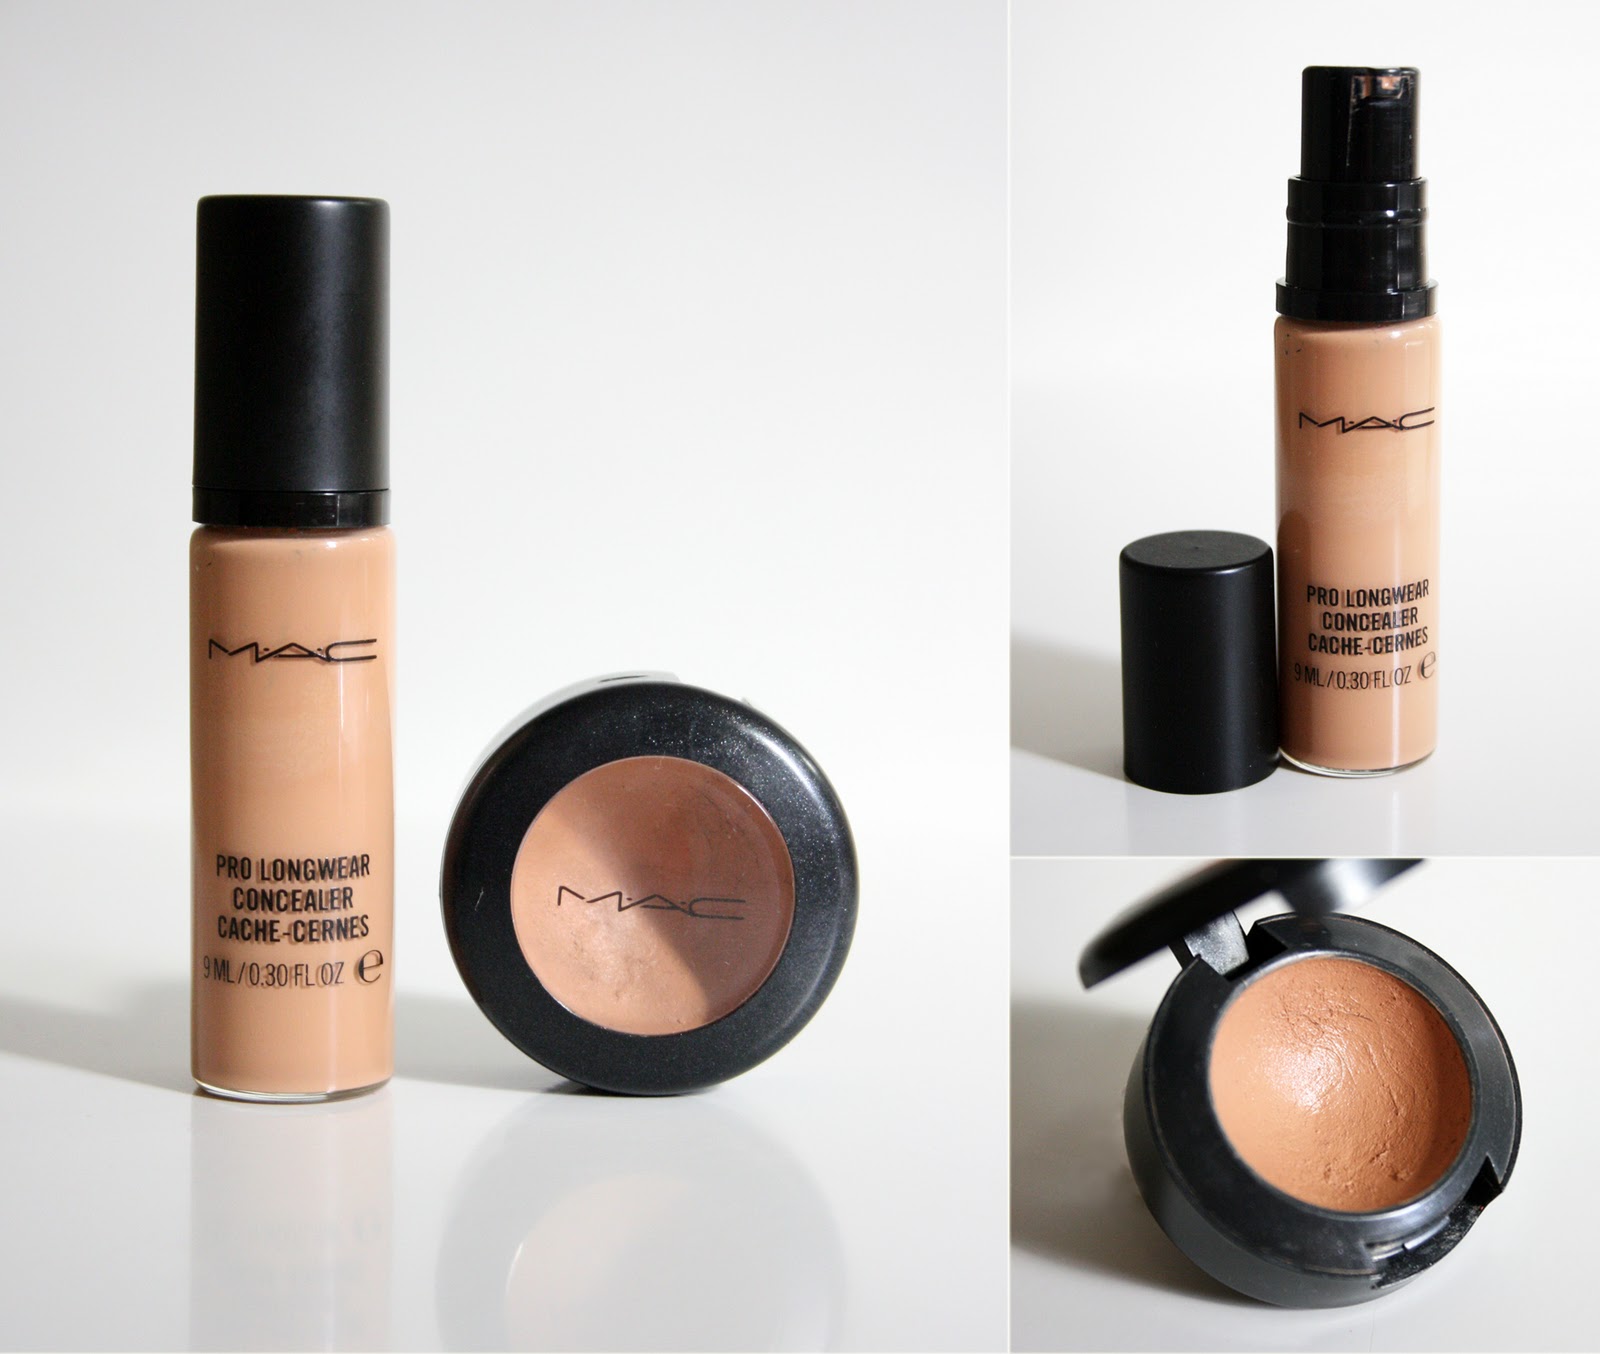 A one-step powder and foundation that provides a matte texture with medium coverage.